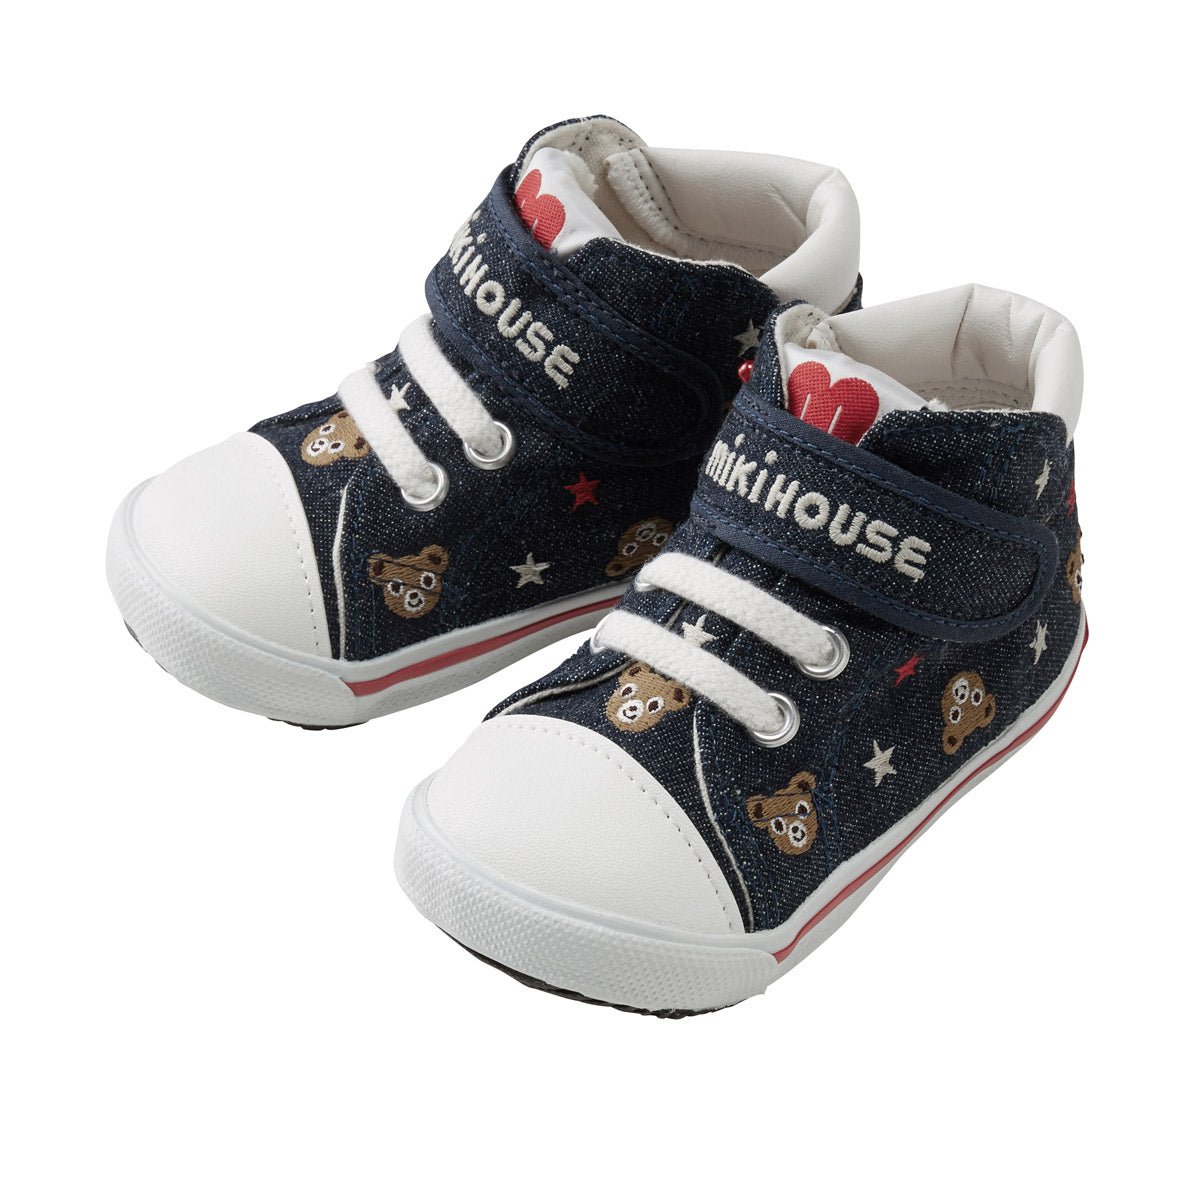 High Top Second Shoes – Stars and Pucci Embroidery - 13-9302-260-33-13